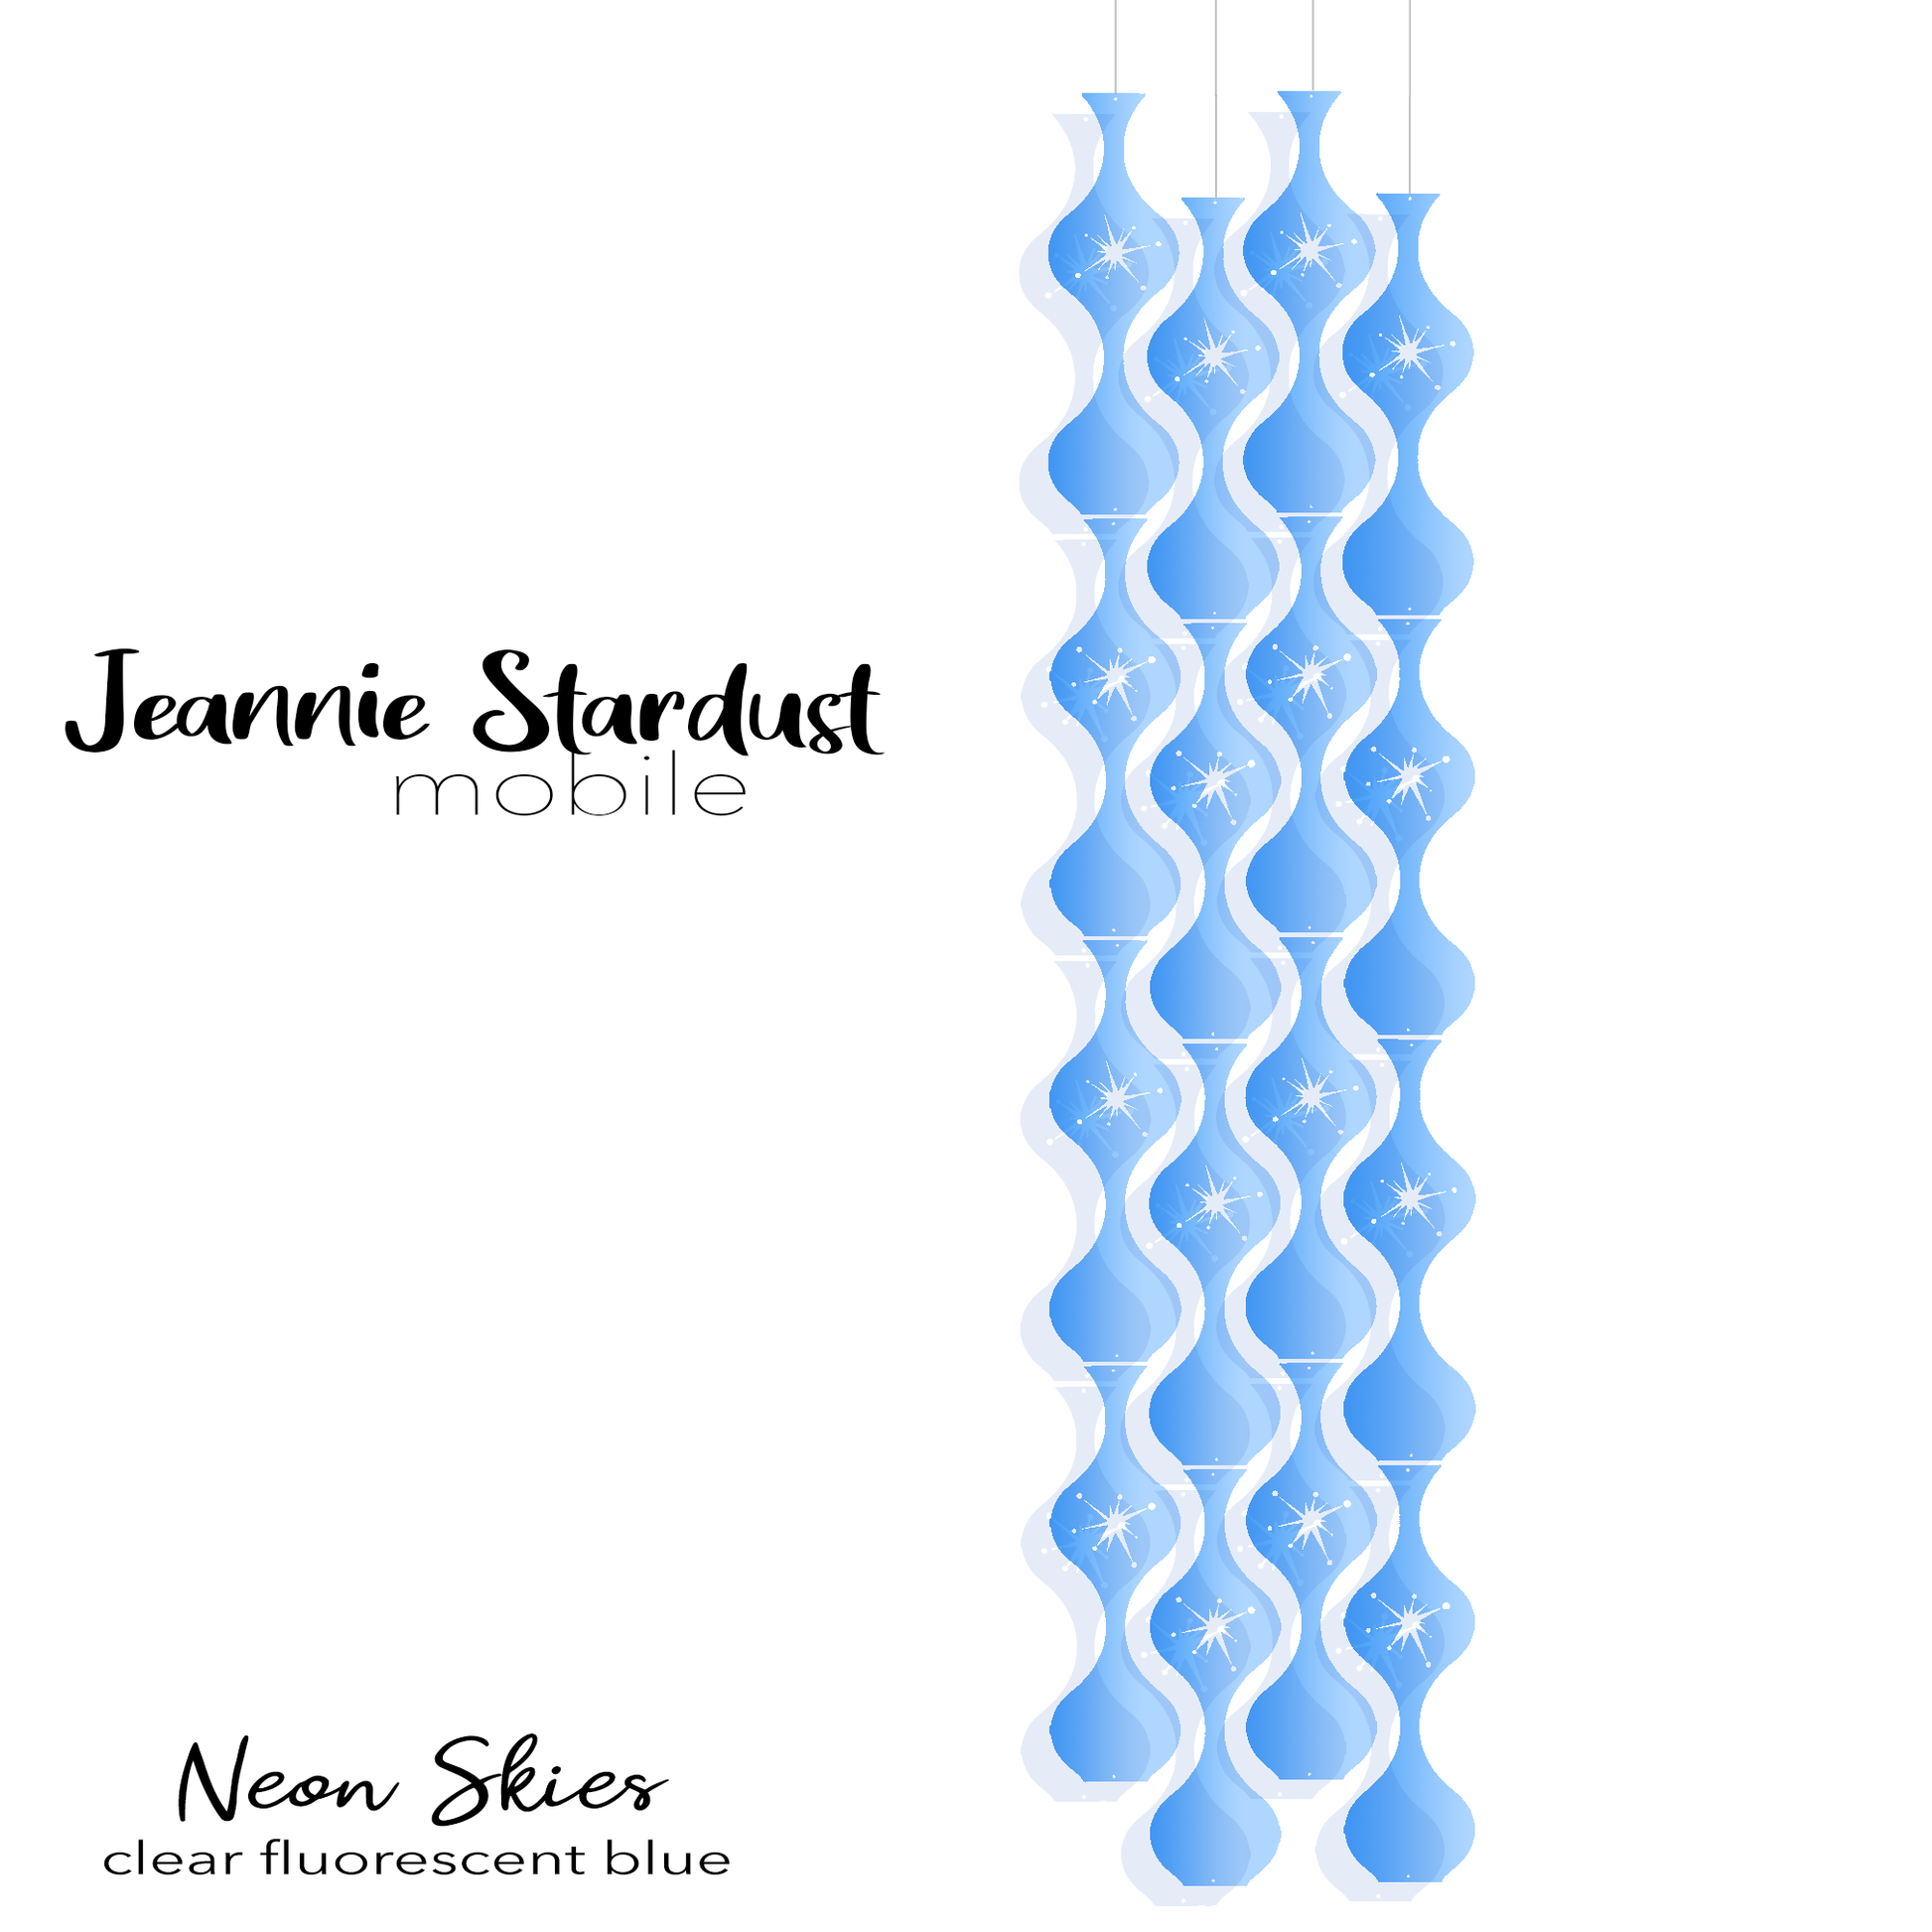 Fluorescent Jeannie Stardust DIY Kit in Neon Blue plexiglass acrylic- hanging art mobiles for mid century modern room decor by AtomicMobiles.com